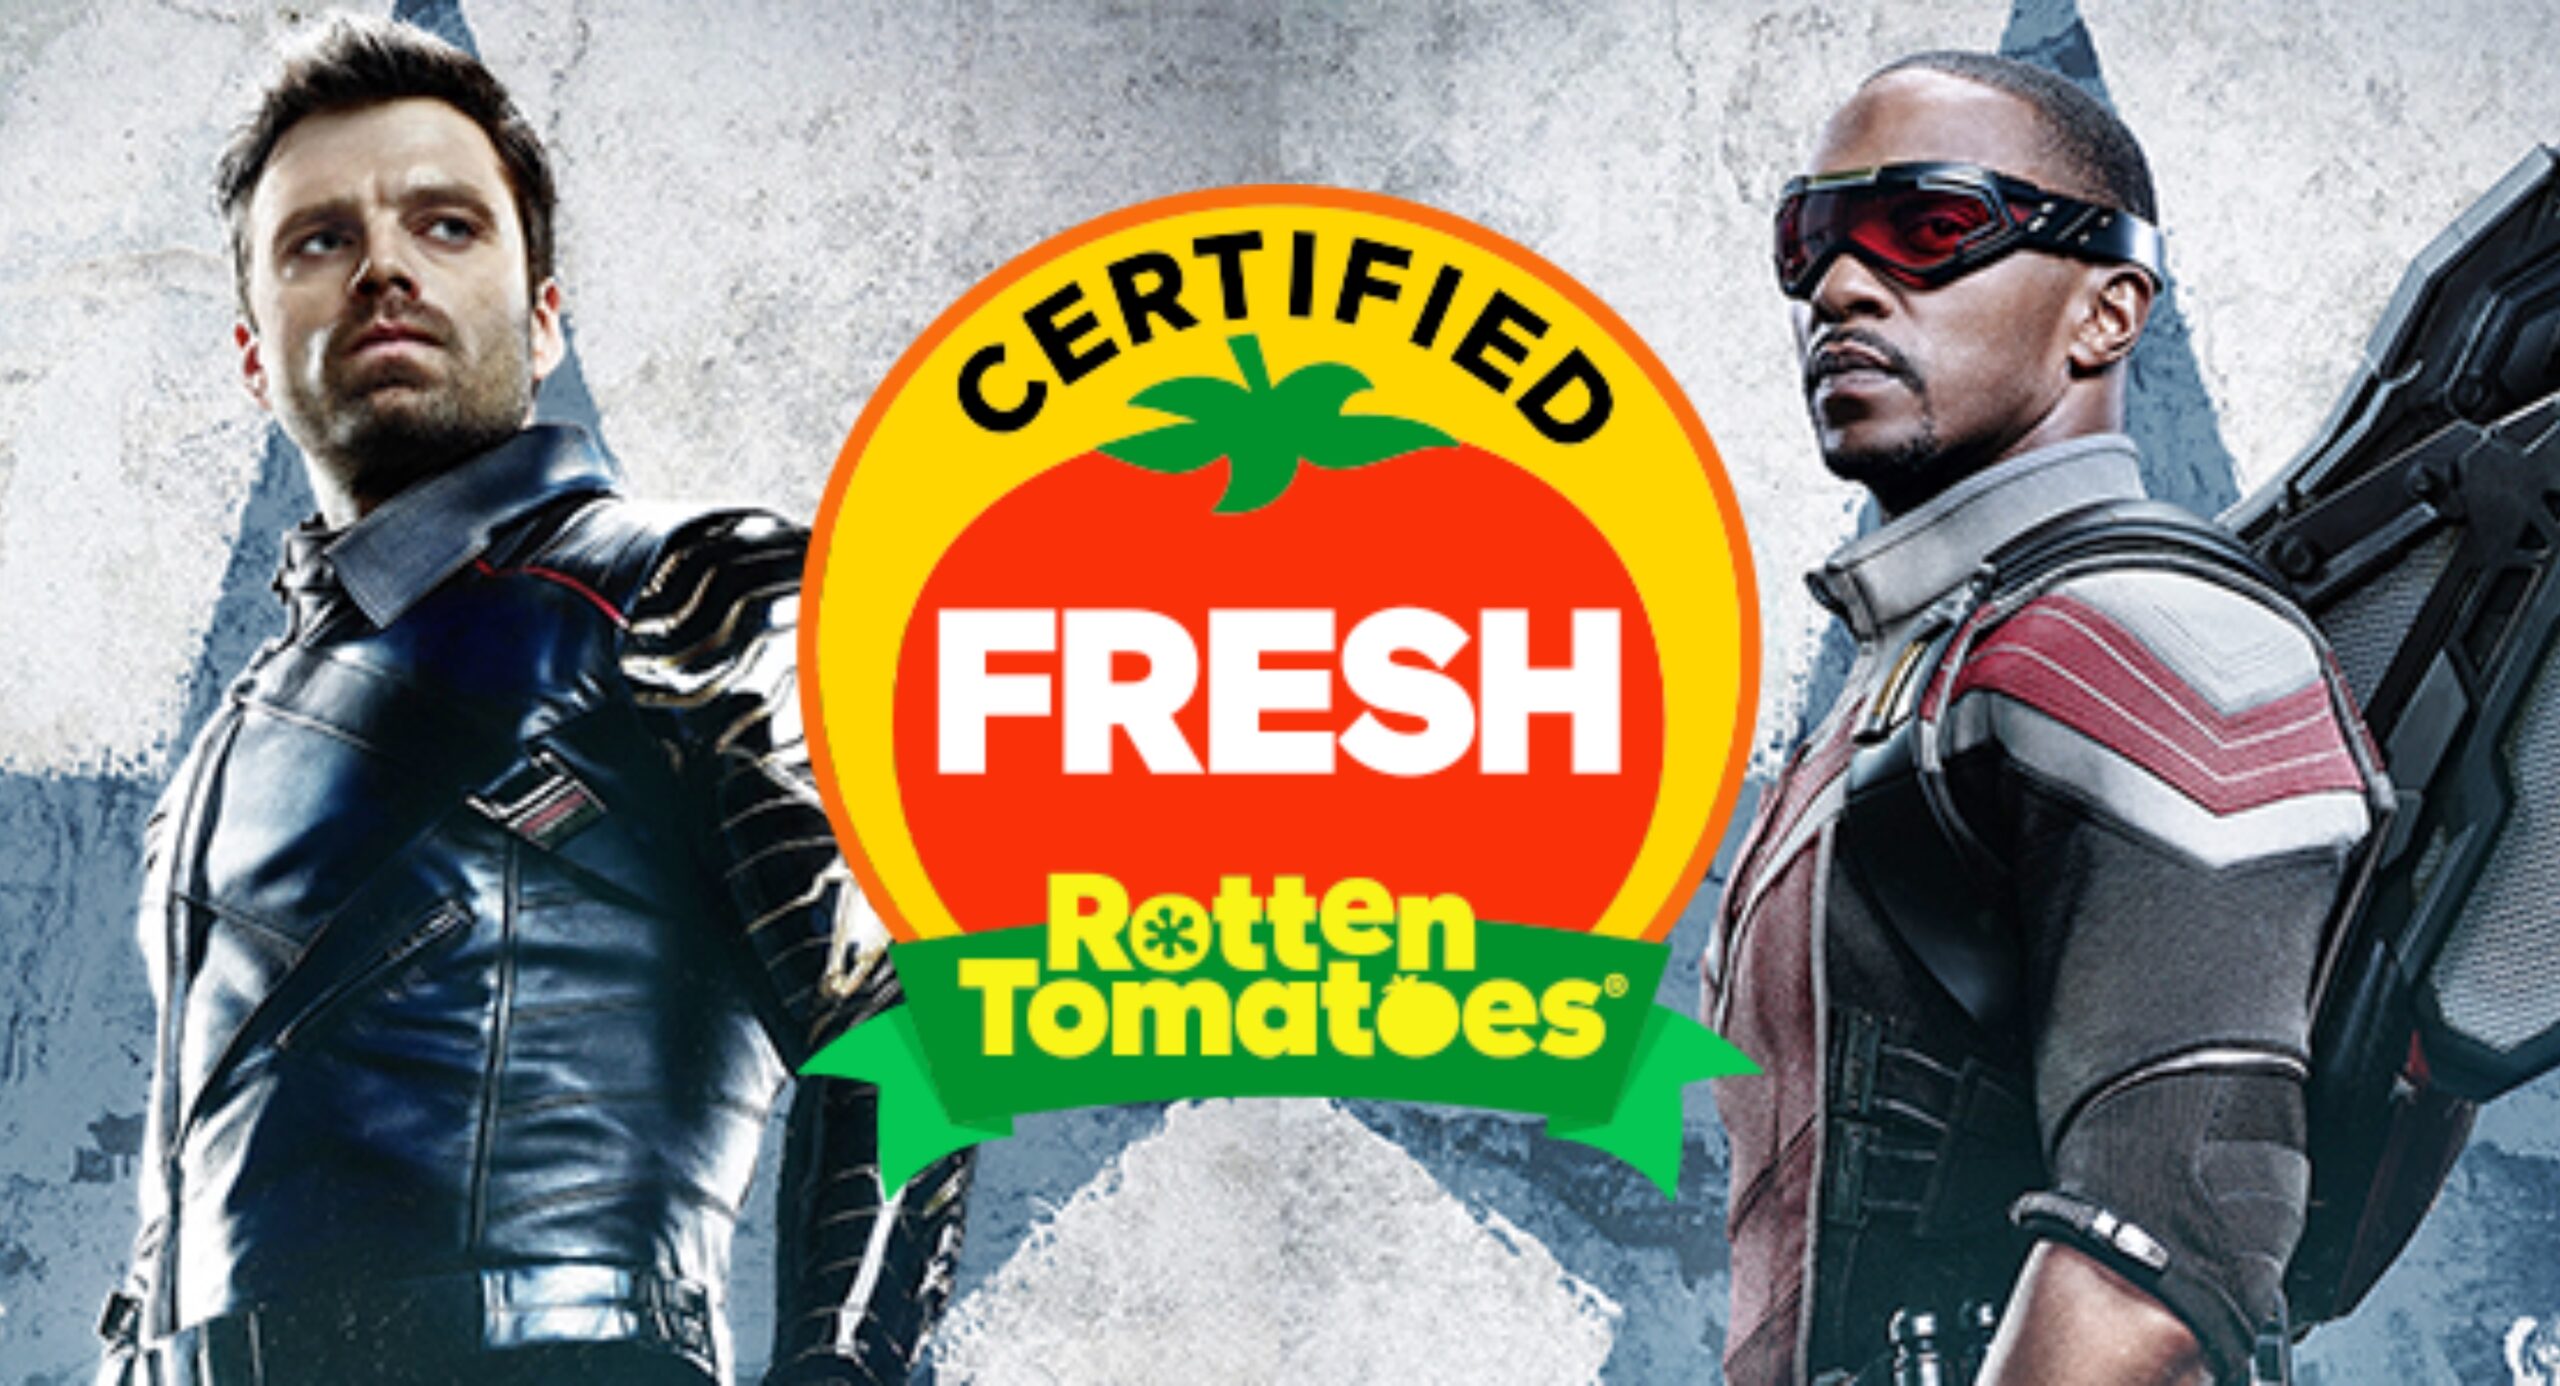 'The Falcon and the Winter Soldier' Receives a Certified Fresh Rating from Rotten Tomatoes